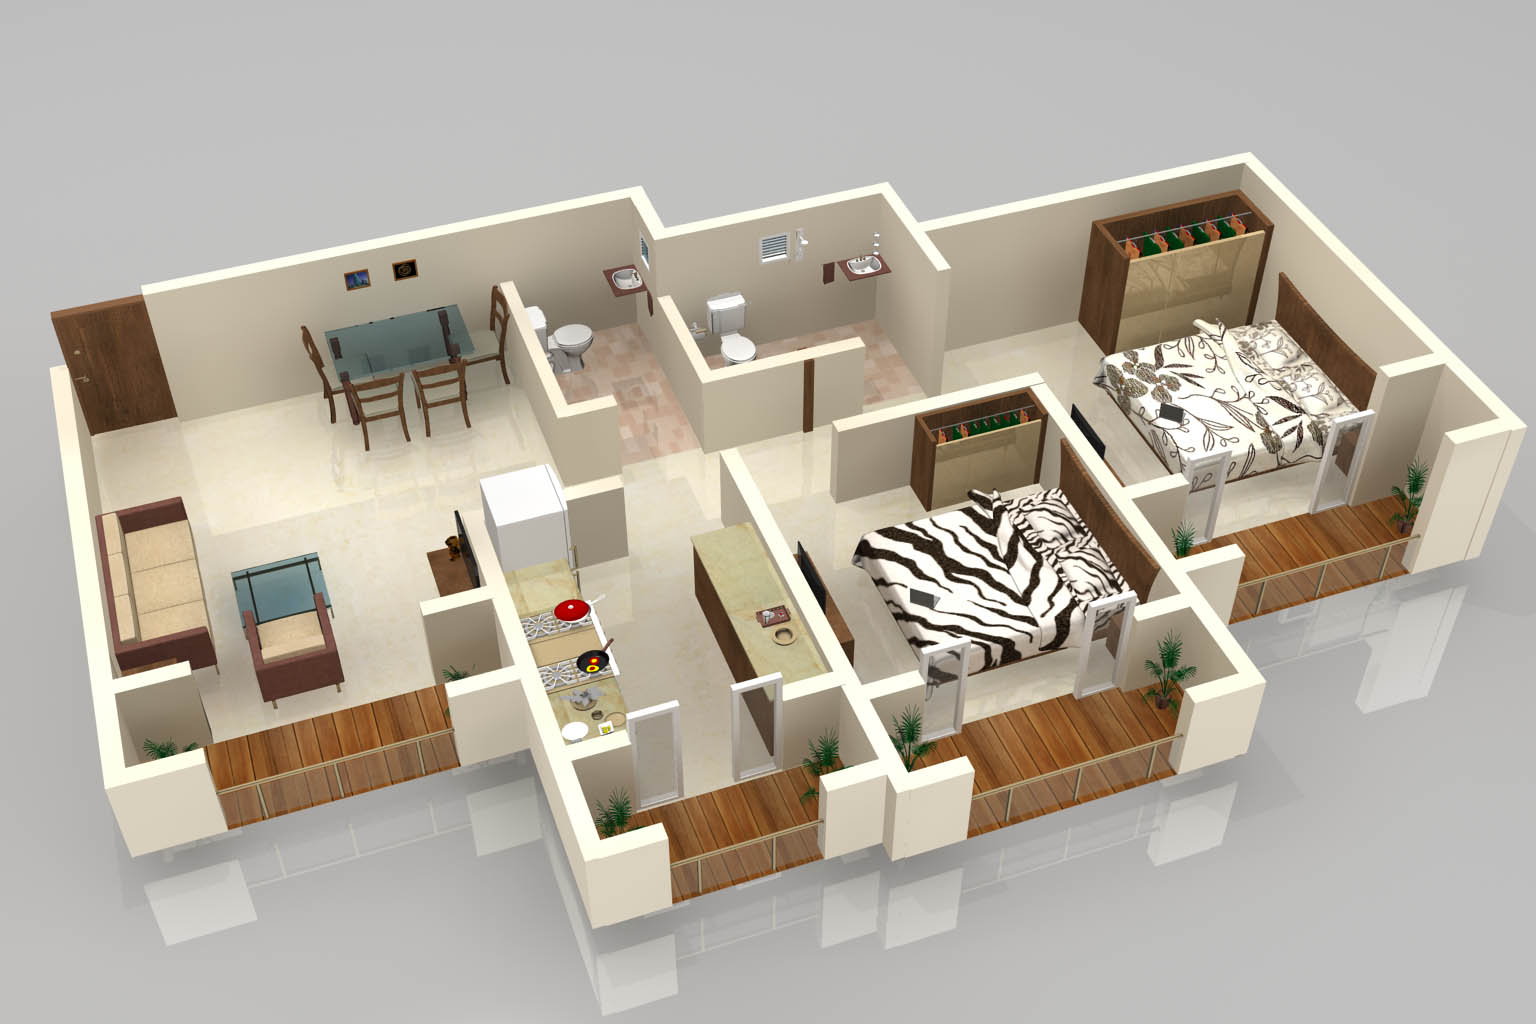 3D Plan Layout Furniture placement Residence.